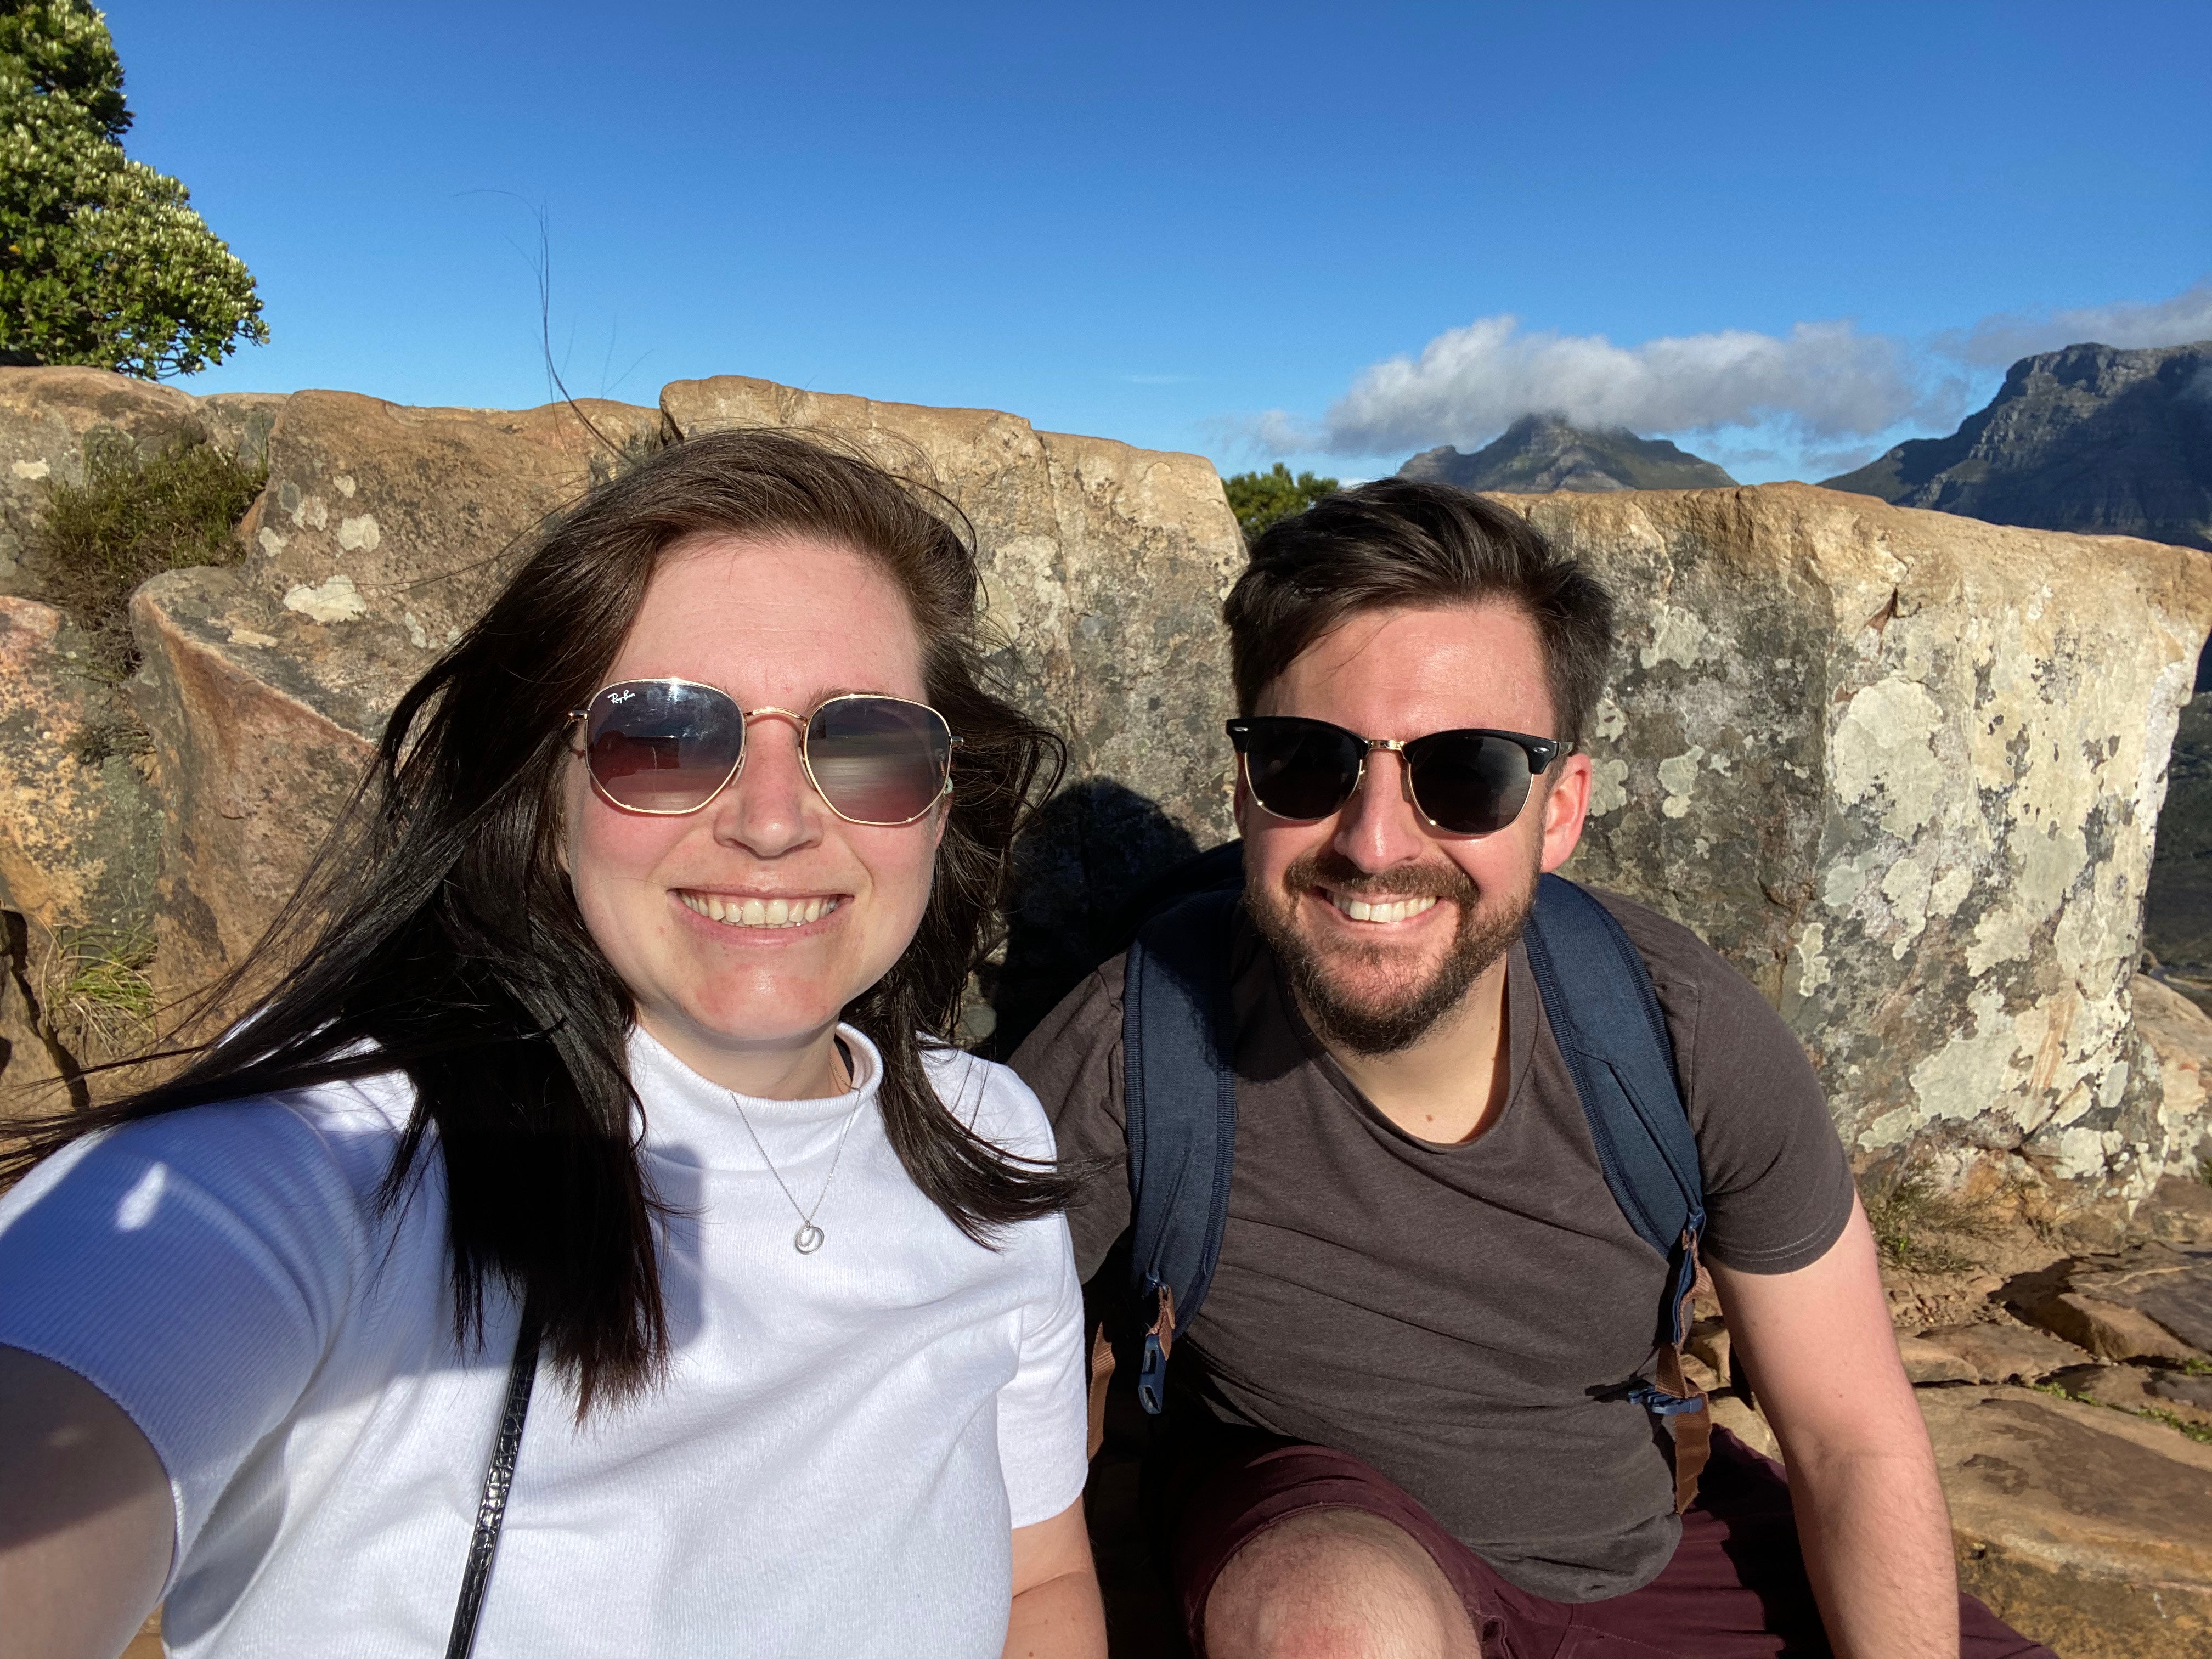 Emily and Owen enjoying South Africa before the red list change